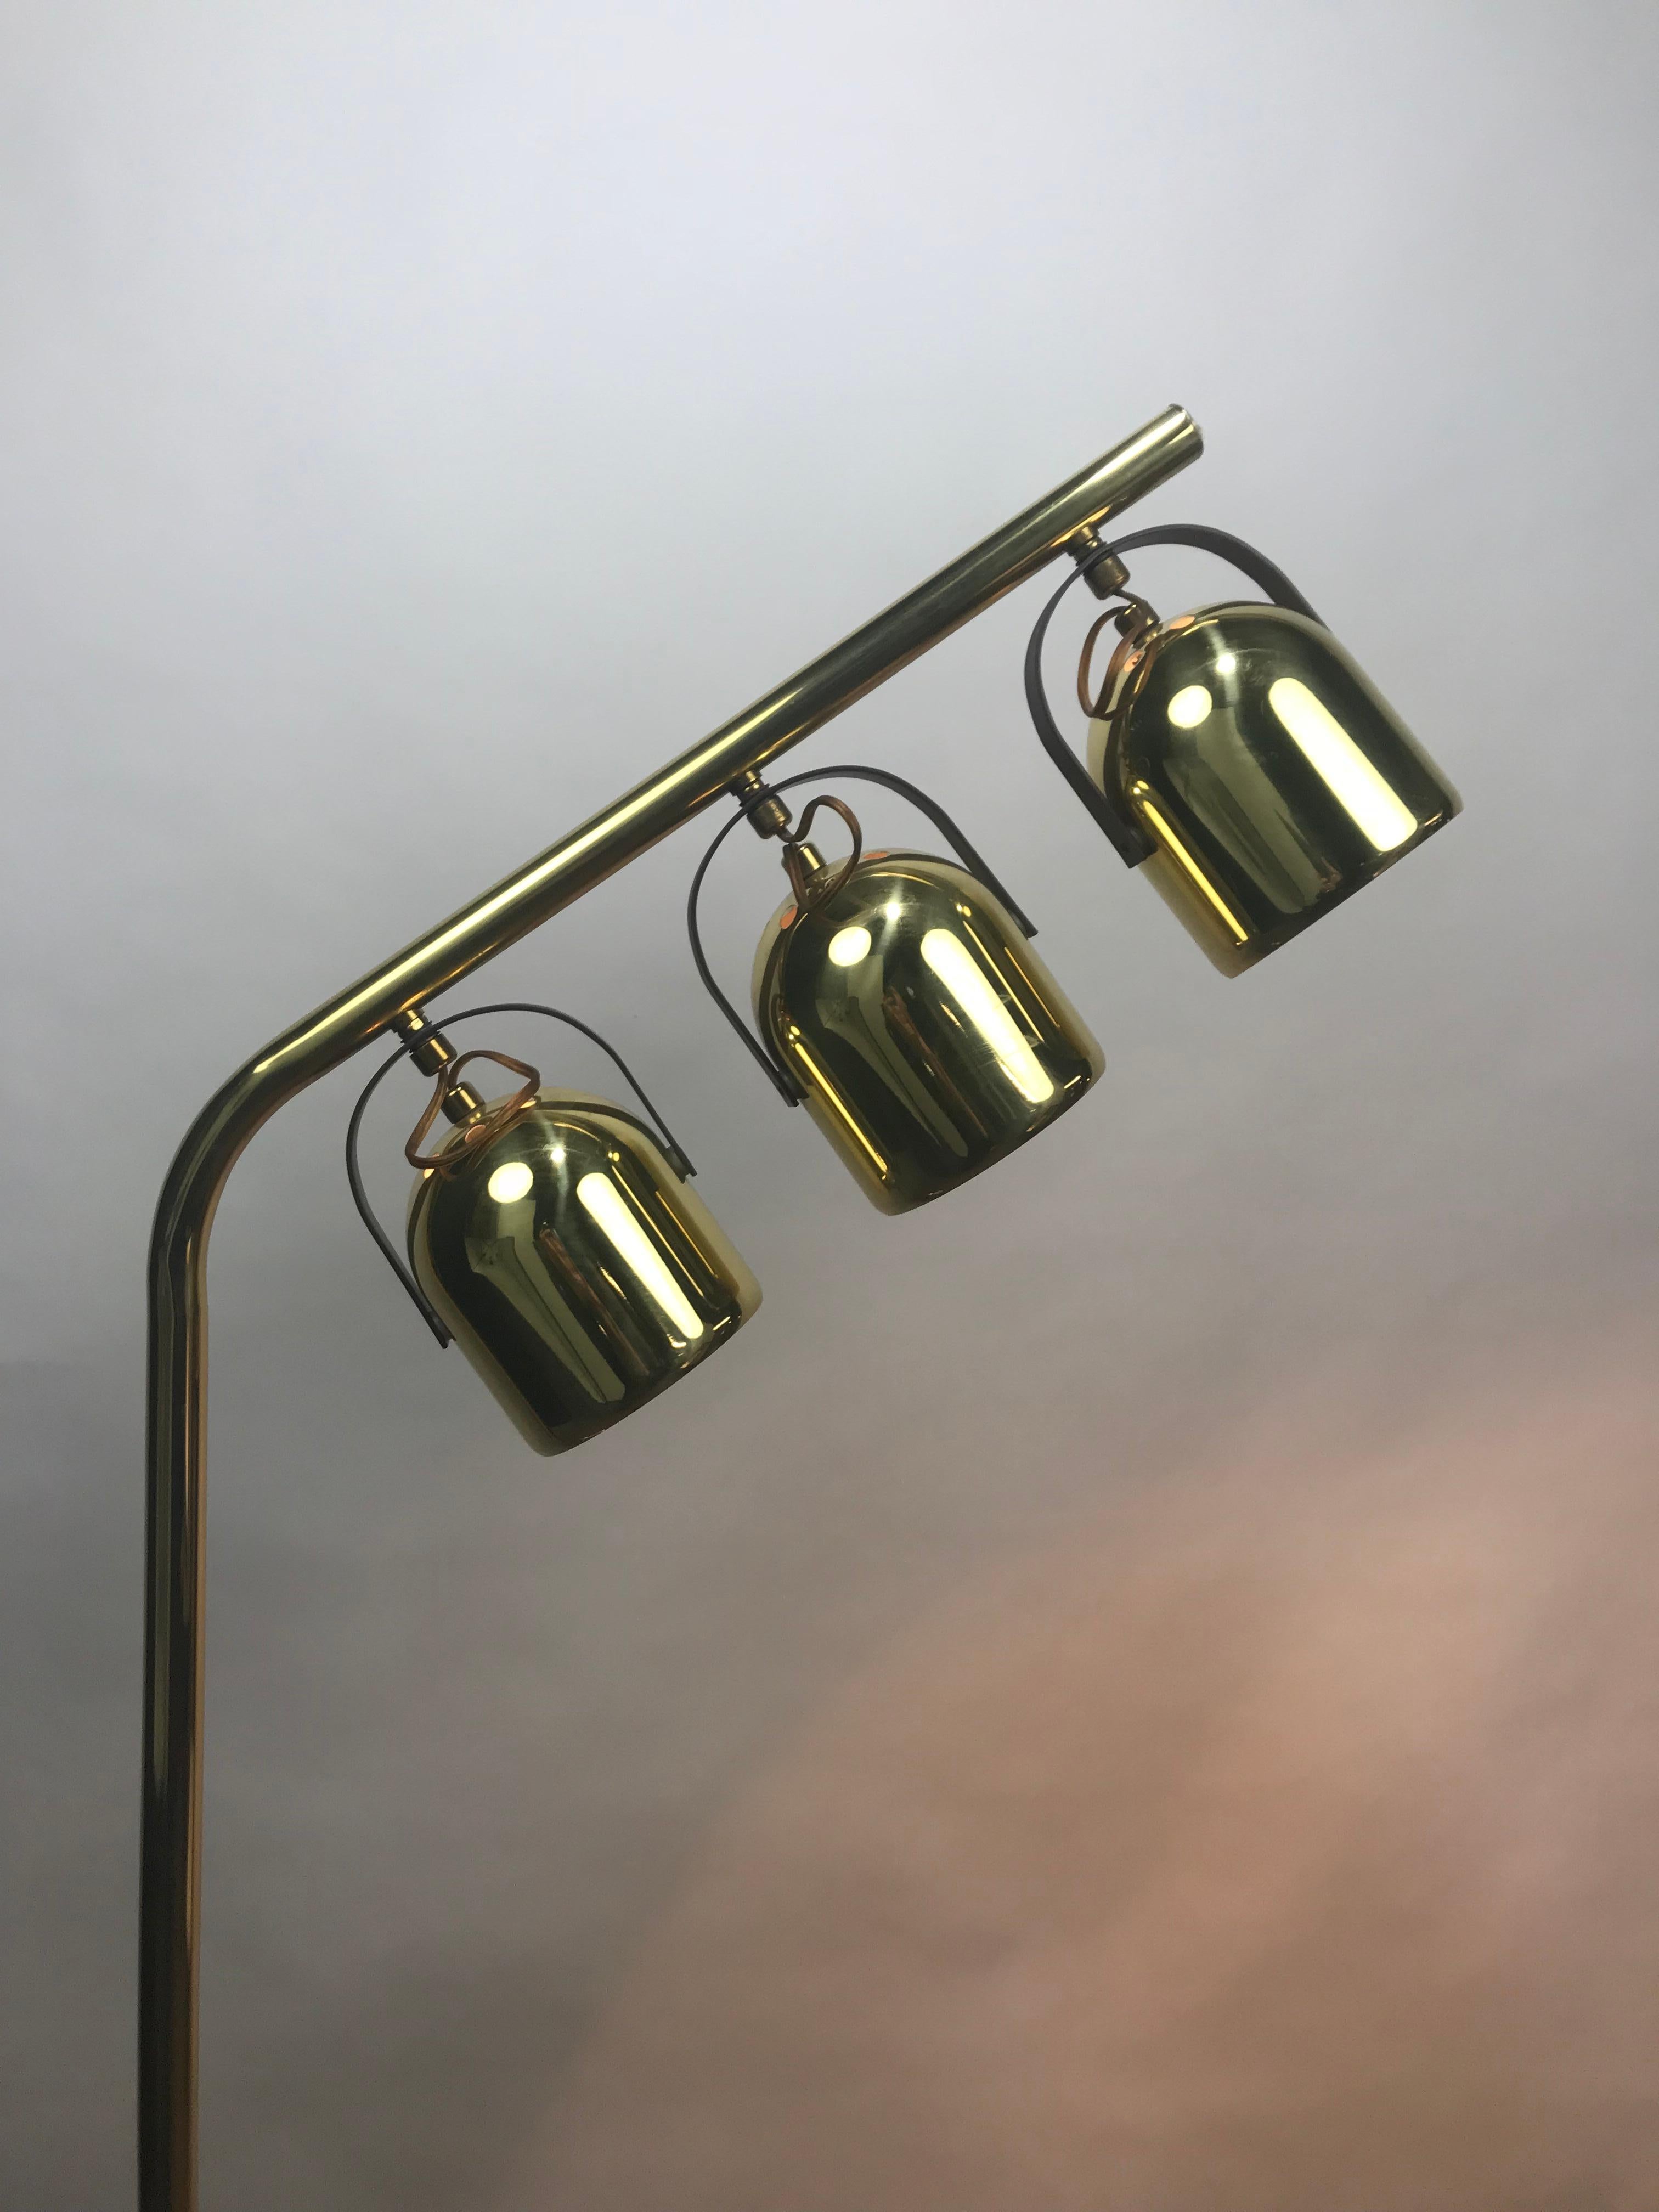 Midcentury Space Age Brass Floor Lamp with Three Pivoting Head after Regggiani In Good Condition For Sale In Buffalo, NY